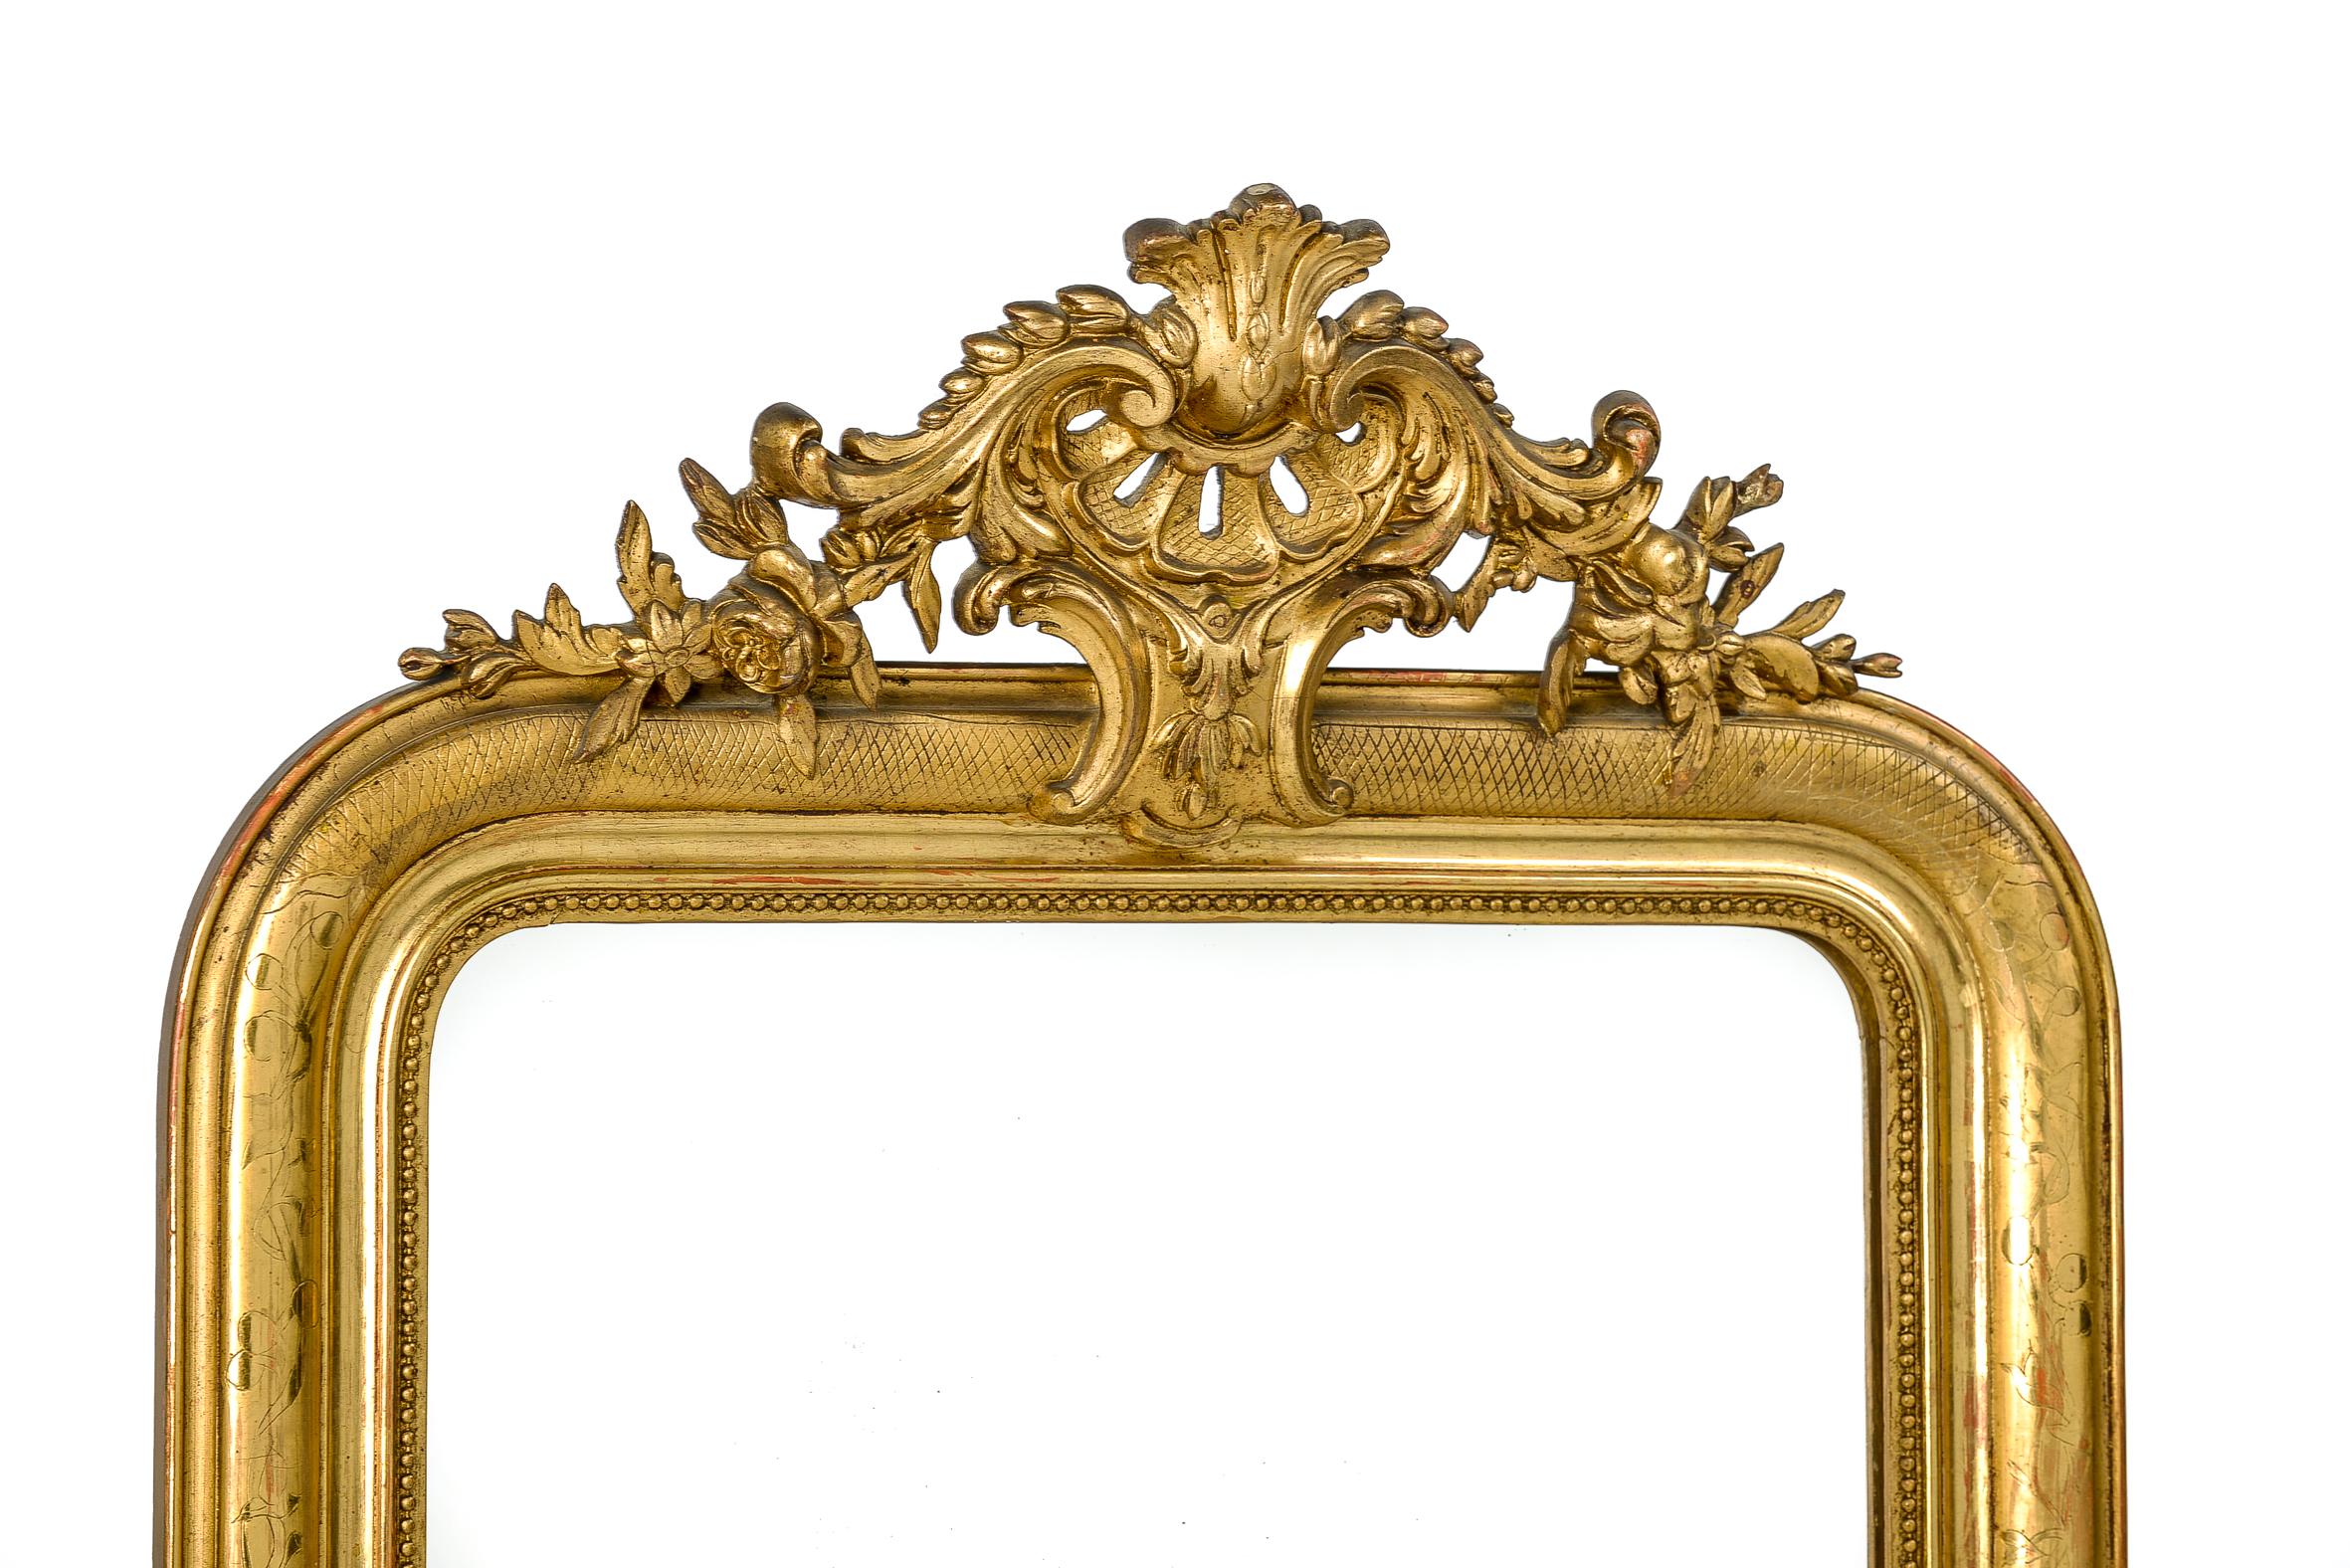 This elegant antique mirror with elaborate crest and intricate etching is made in France, circa 1870.
It has the upper rounded corners typical for Louis Philippe mirrors. The frame is enriched with a beautiful ornate crest built on a central shell